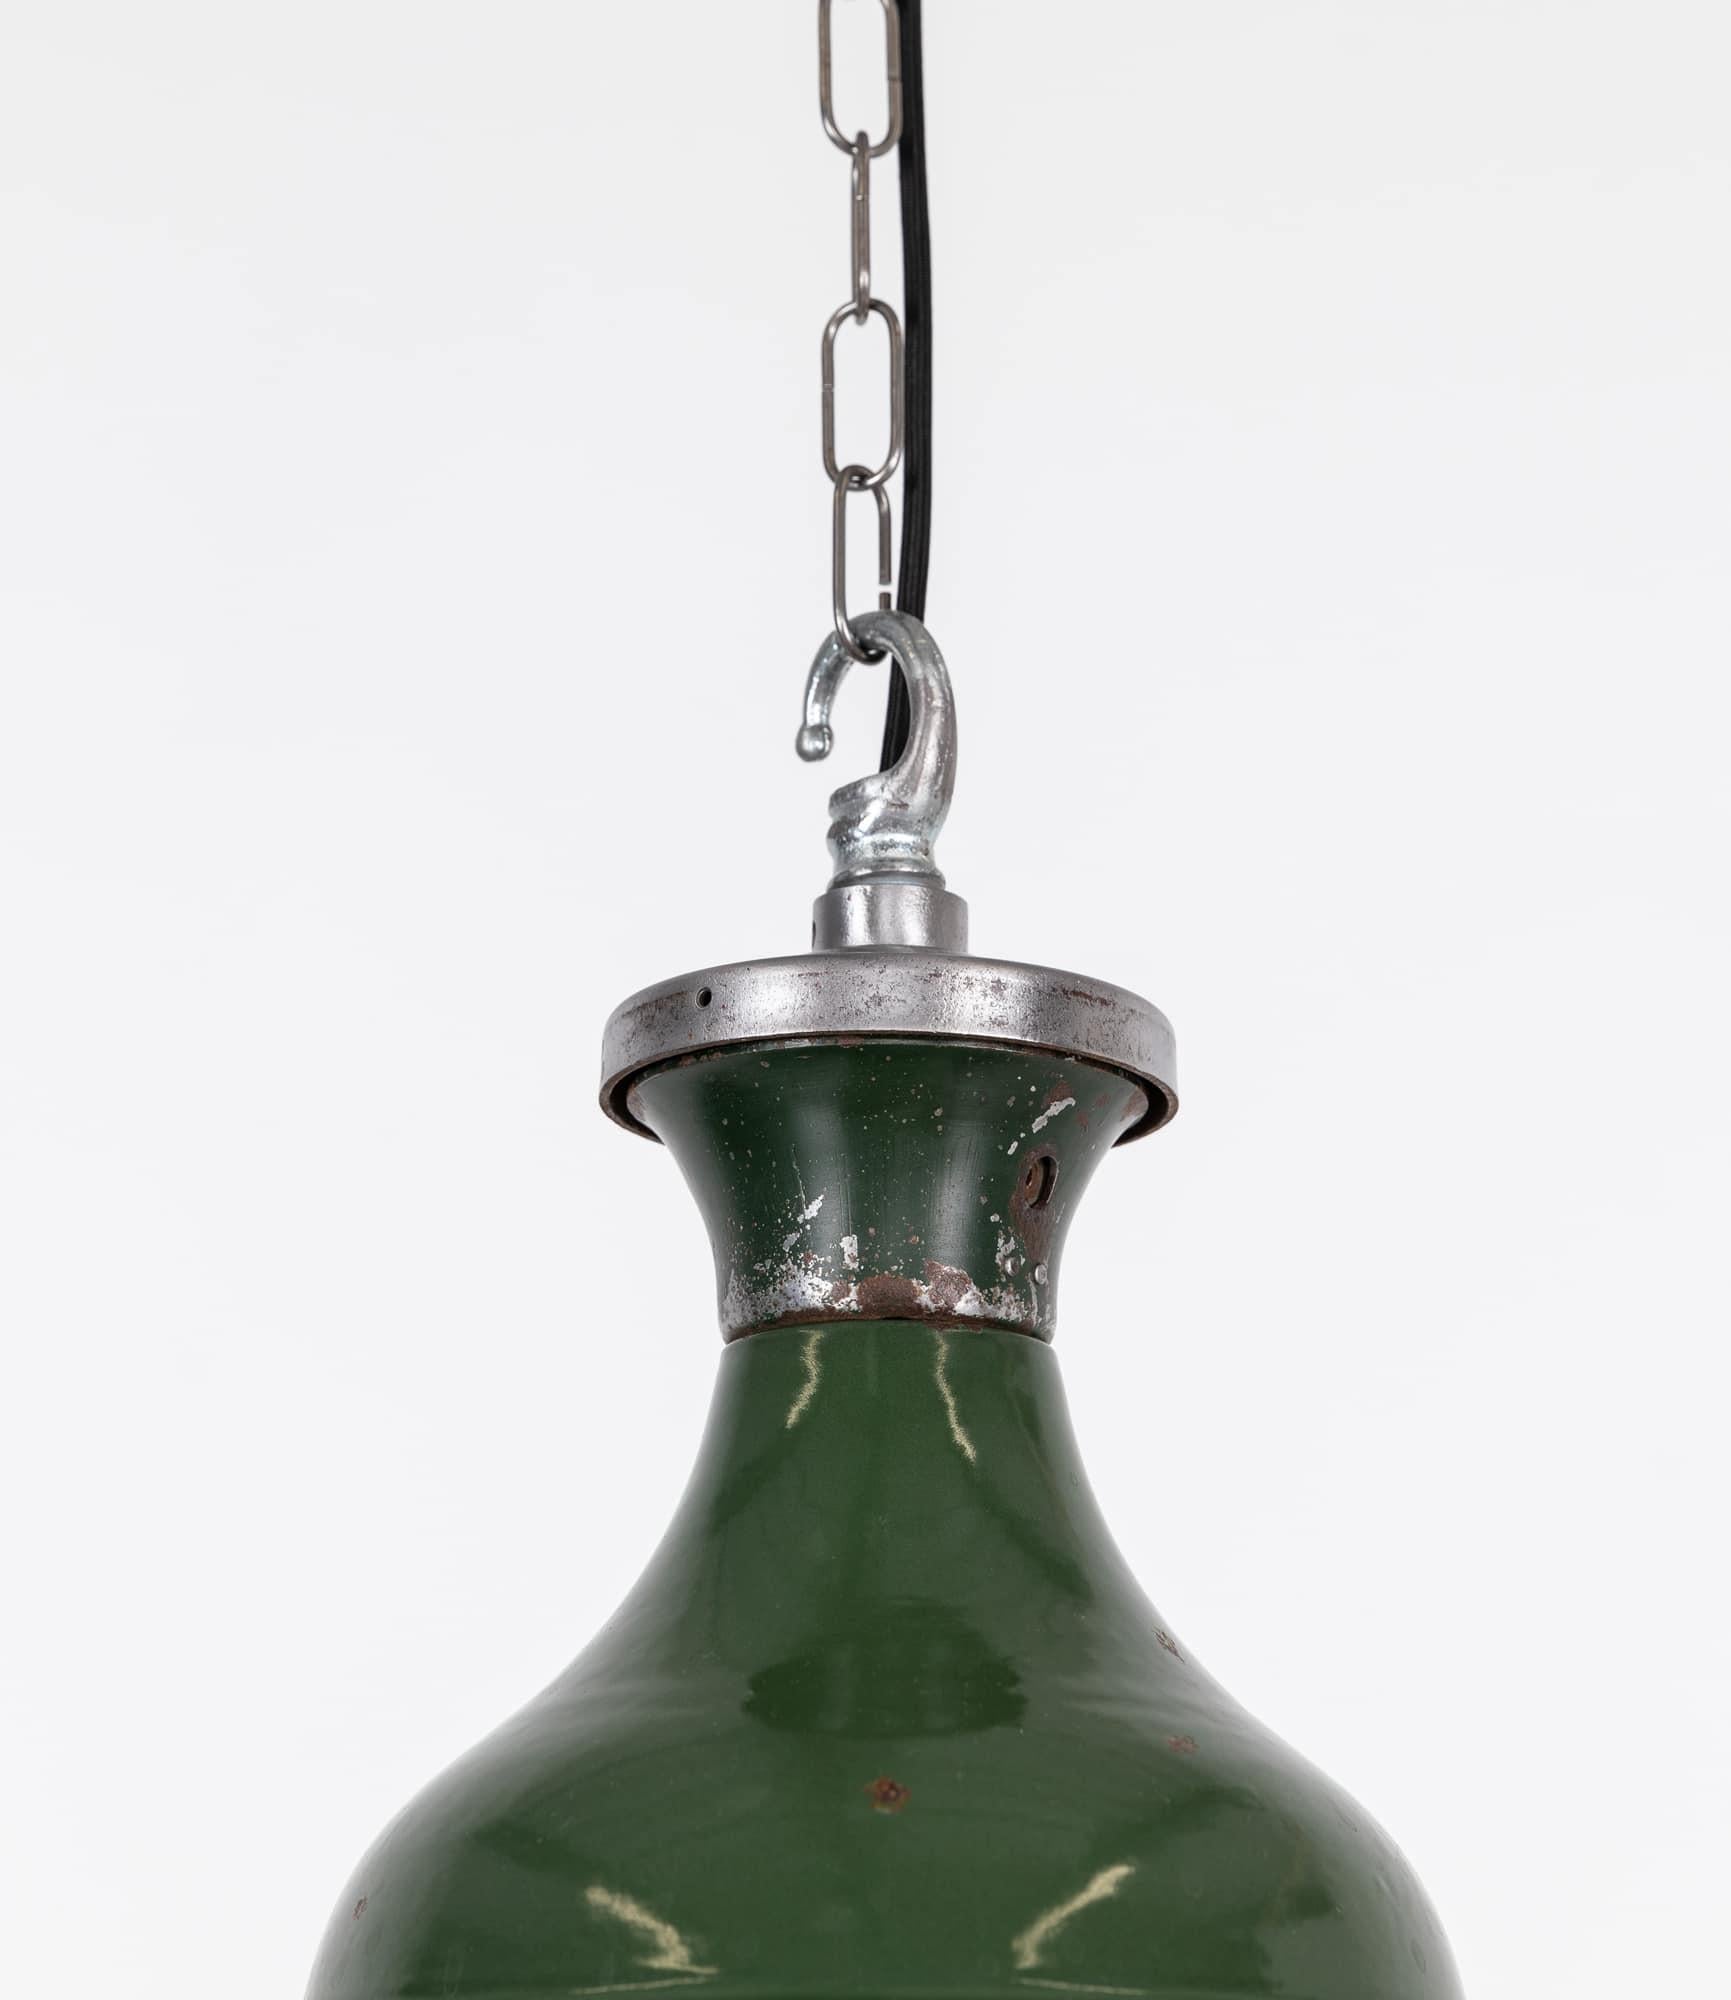 X-Large Vintage Industrial Benjamin Green Enamel Factory Pendant Light, C.1940 In Fair Condition For Sale In London, GB